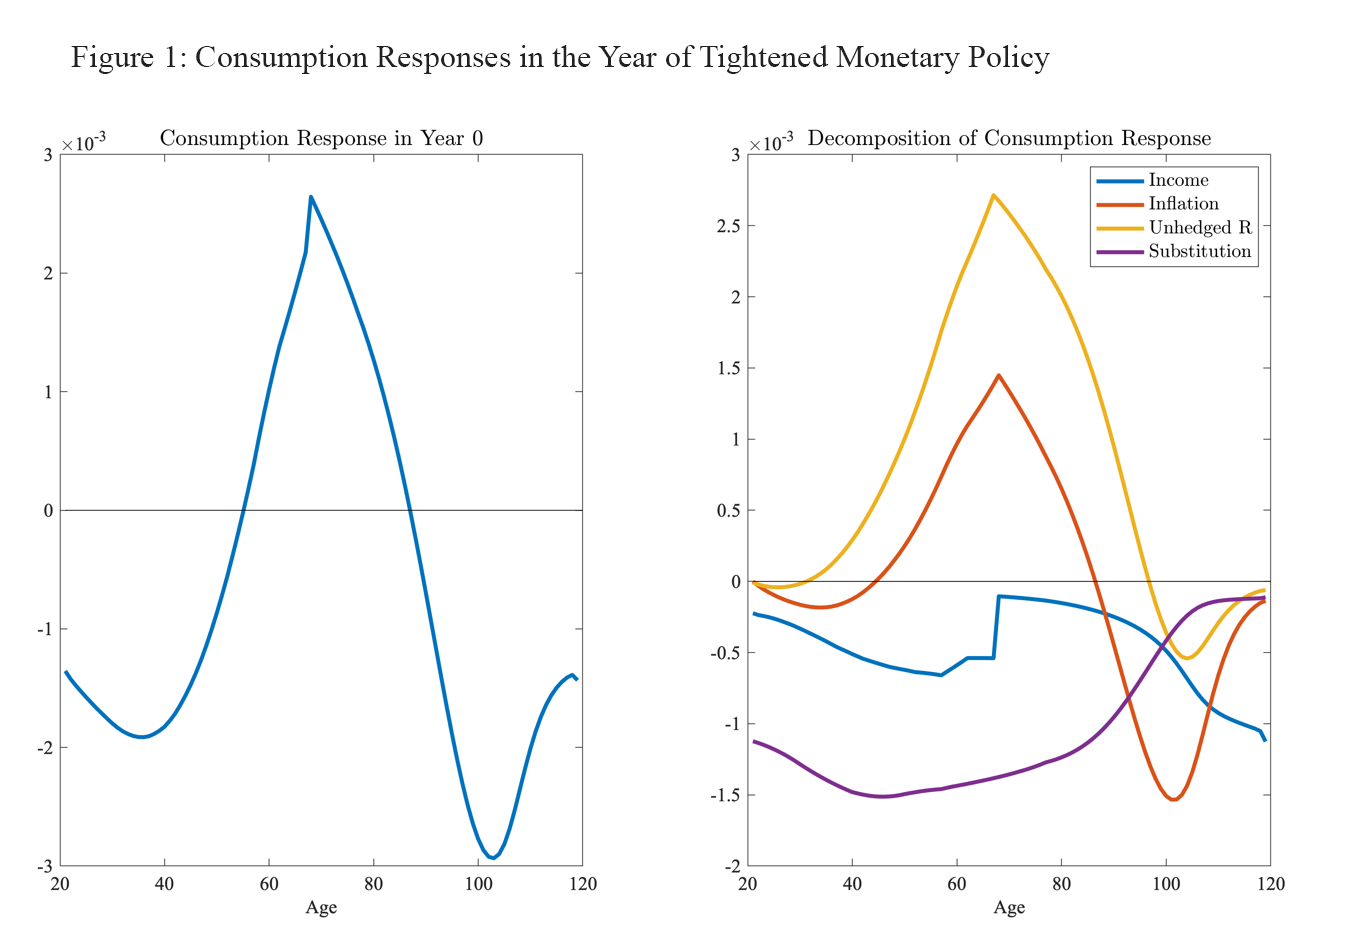 Figure 1: Consumption Responses in the Year of Tightened Monetary Policy